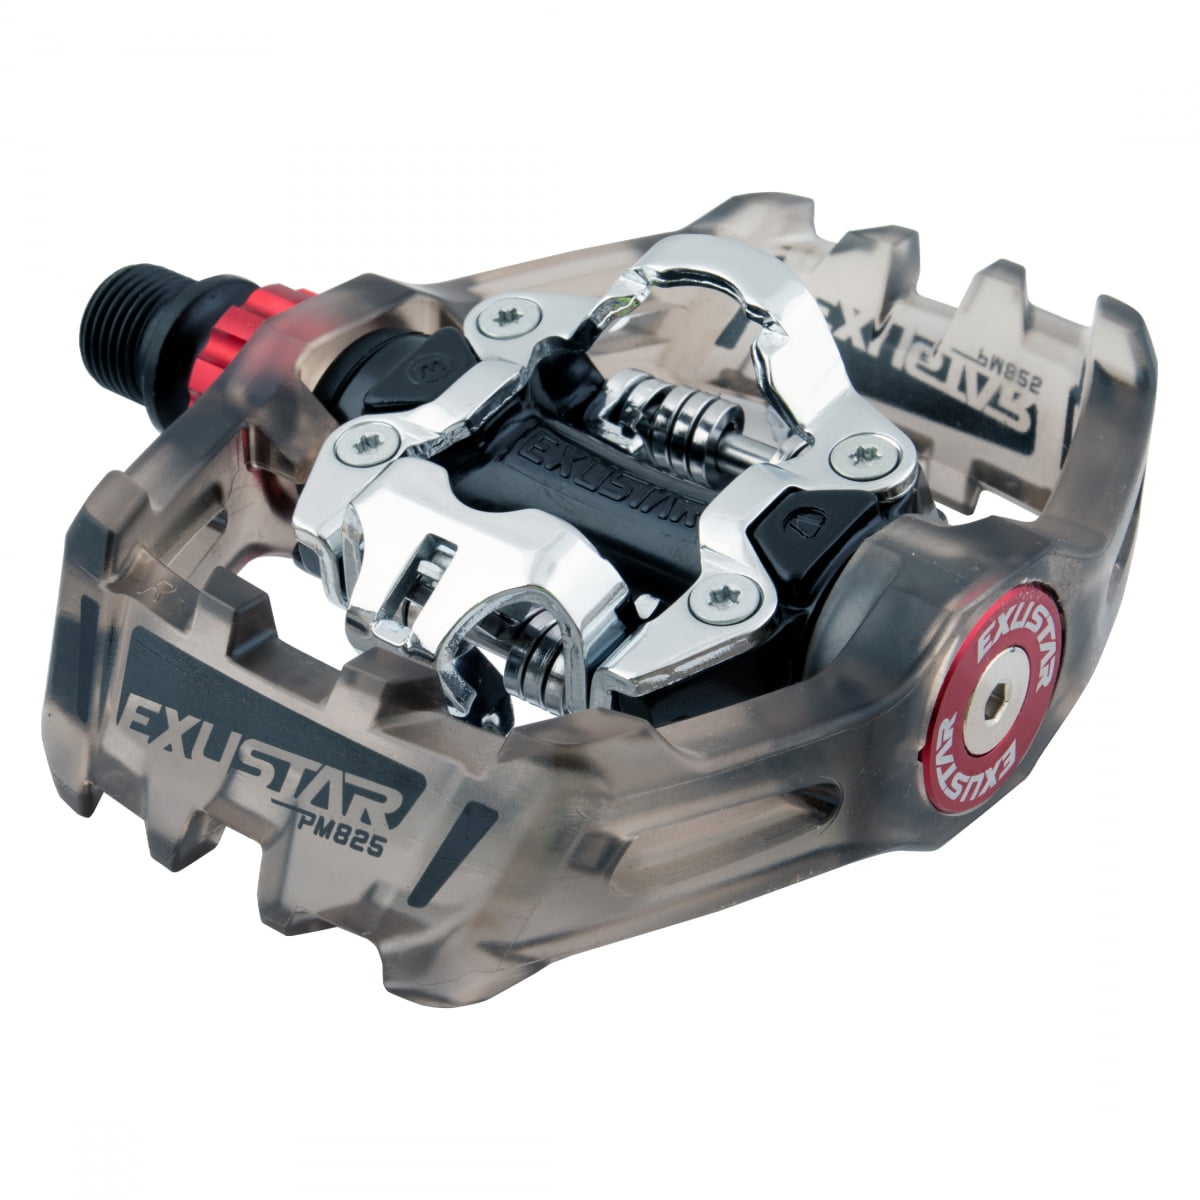 Sided Exustar Dual PM825 Aluminum Pedals Grey/Silver 9/16\